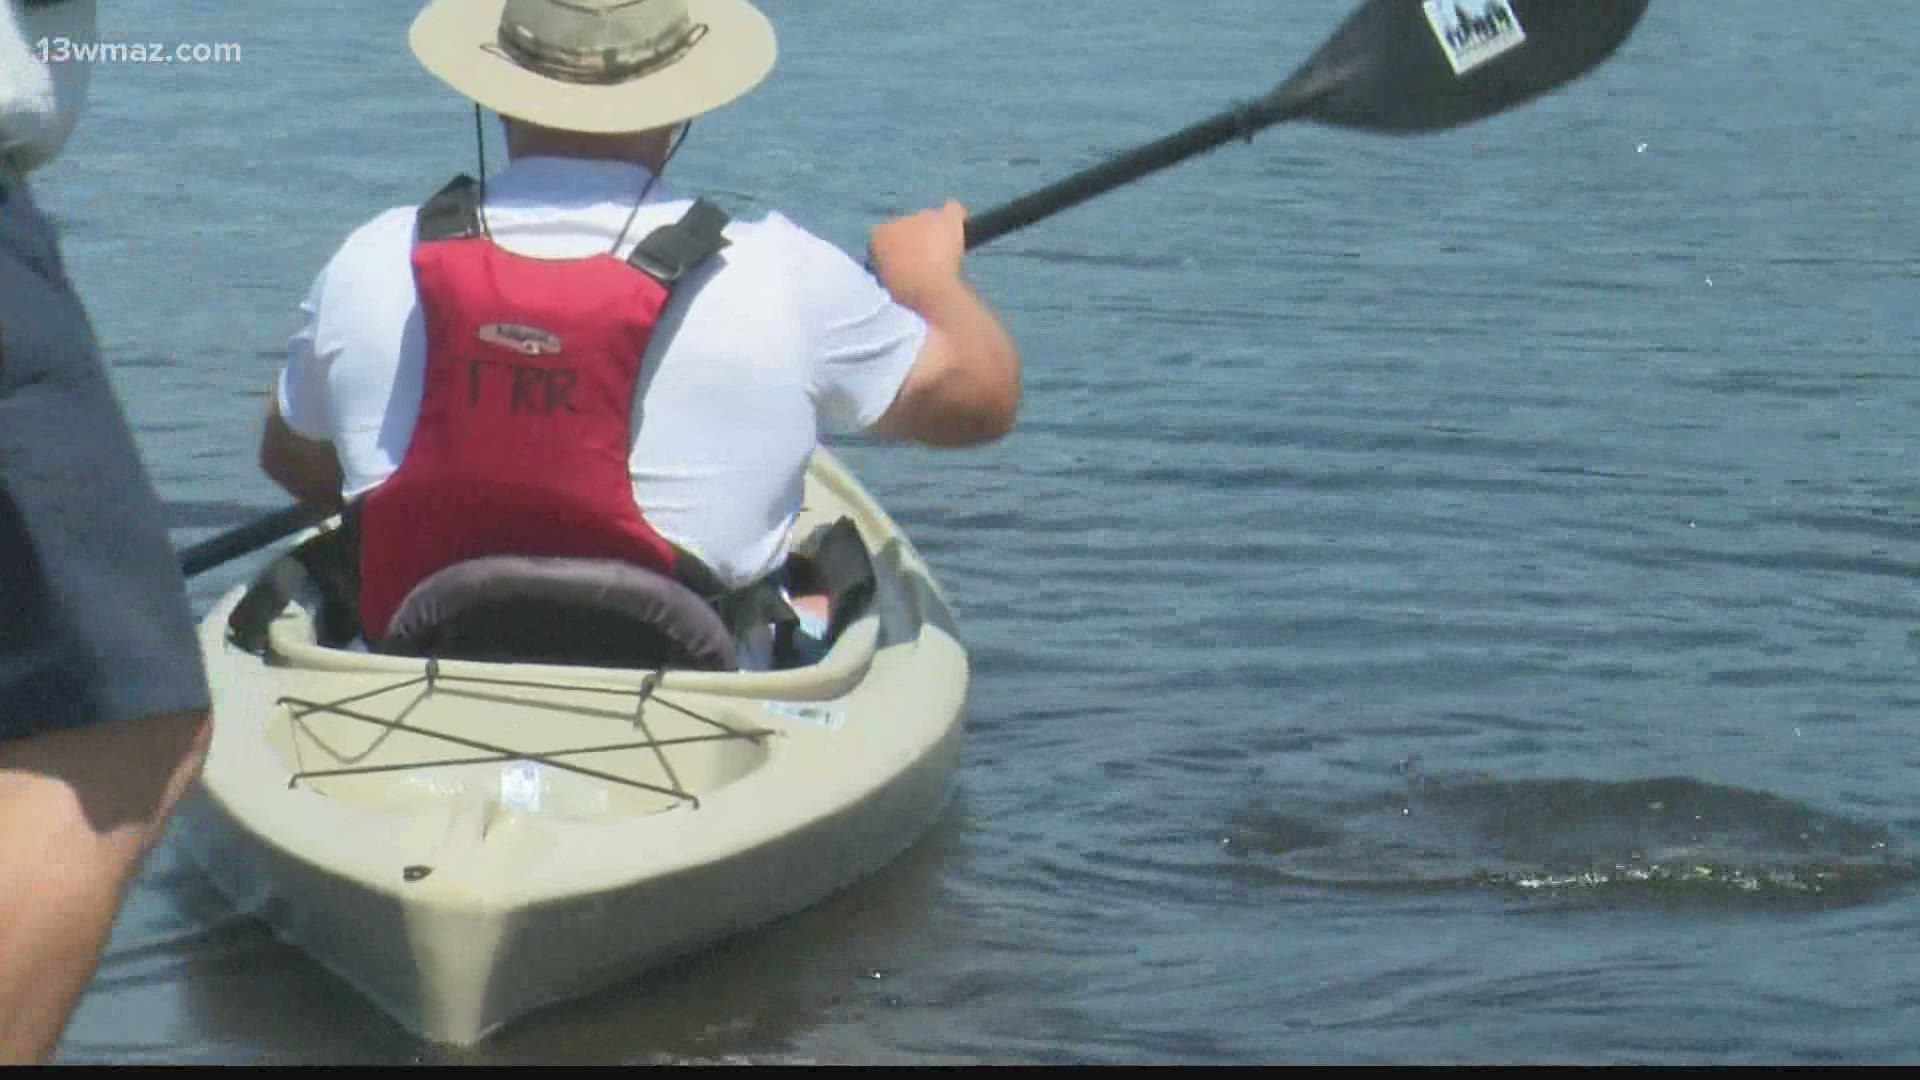 The local chapter of Team River Runner provides kayaks free of charge to veterans and their families